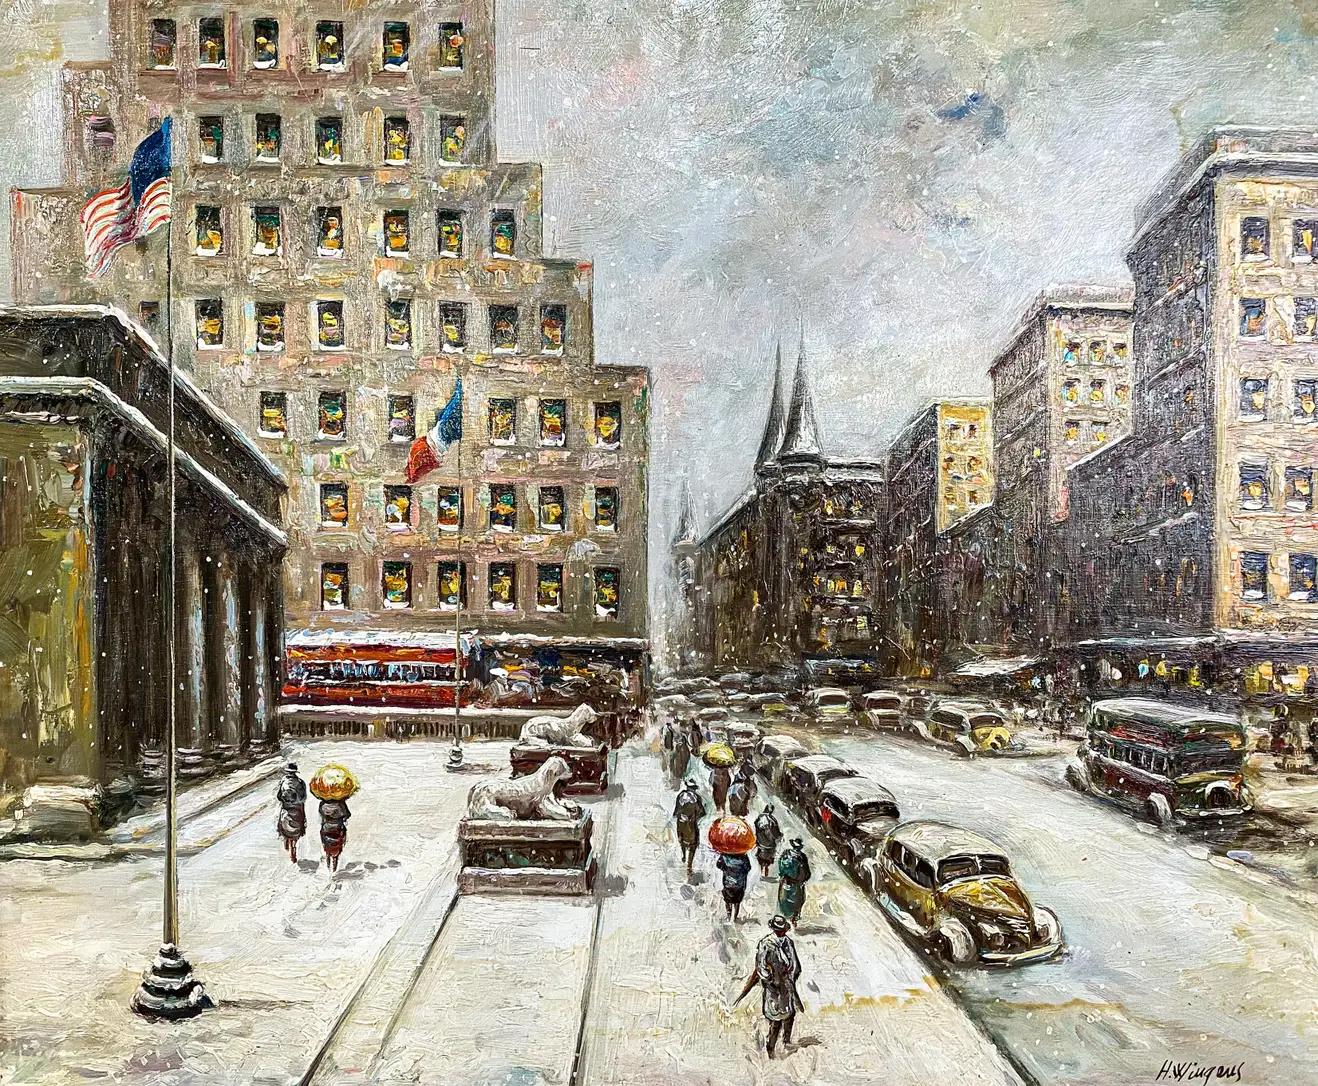 A cityscape oil on canvas painting in the manner Guy Carleton Wiggins ( American, 1883-1962) showing New York City in the 60s. The painting depicts large buildings, people walking and cars parked on the street describing the energetic and busy life